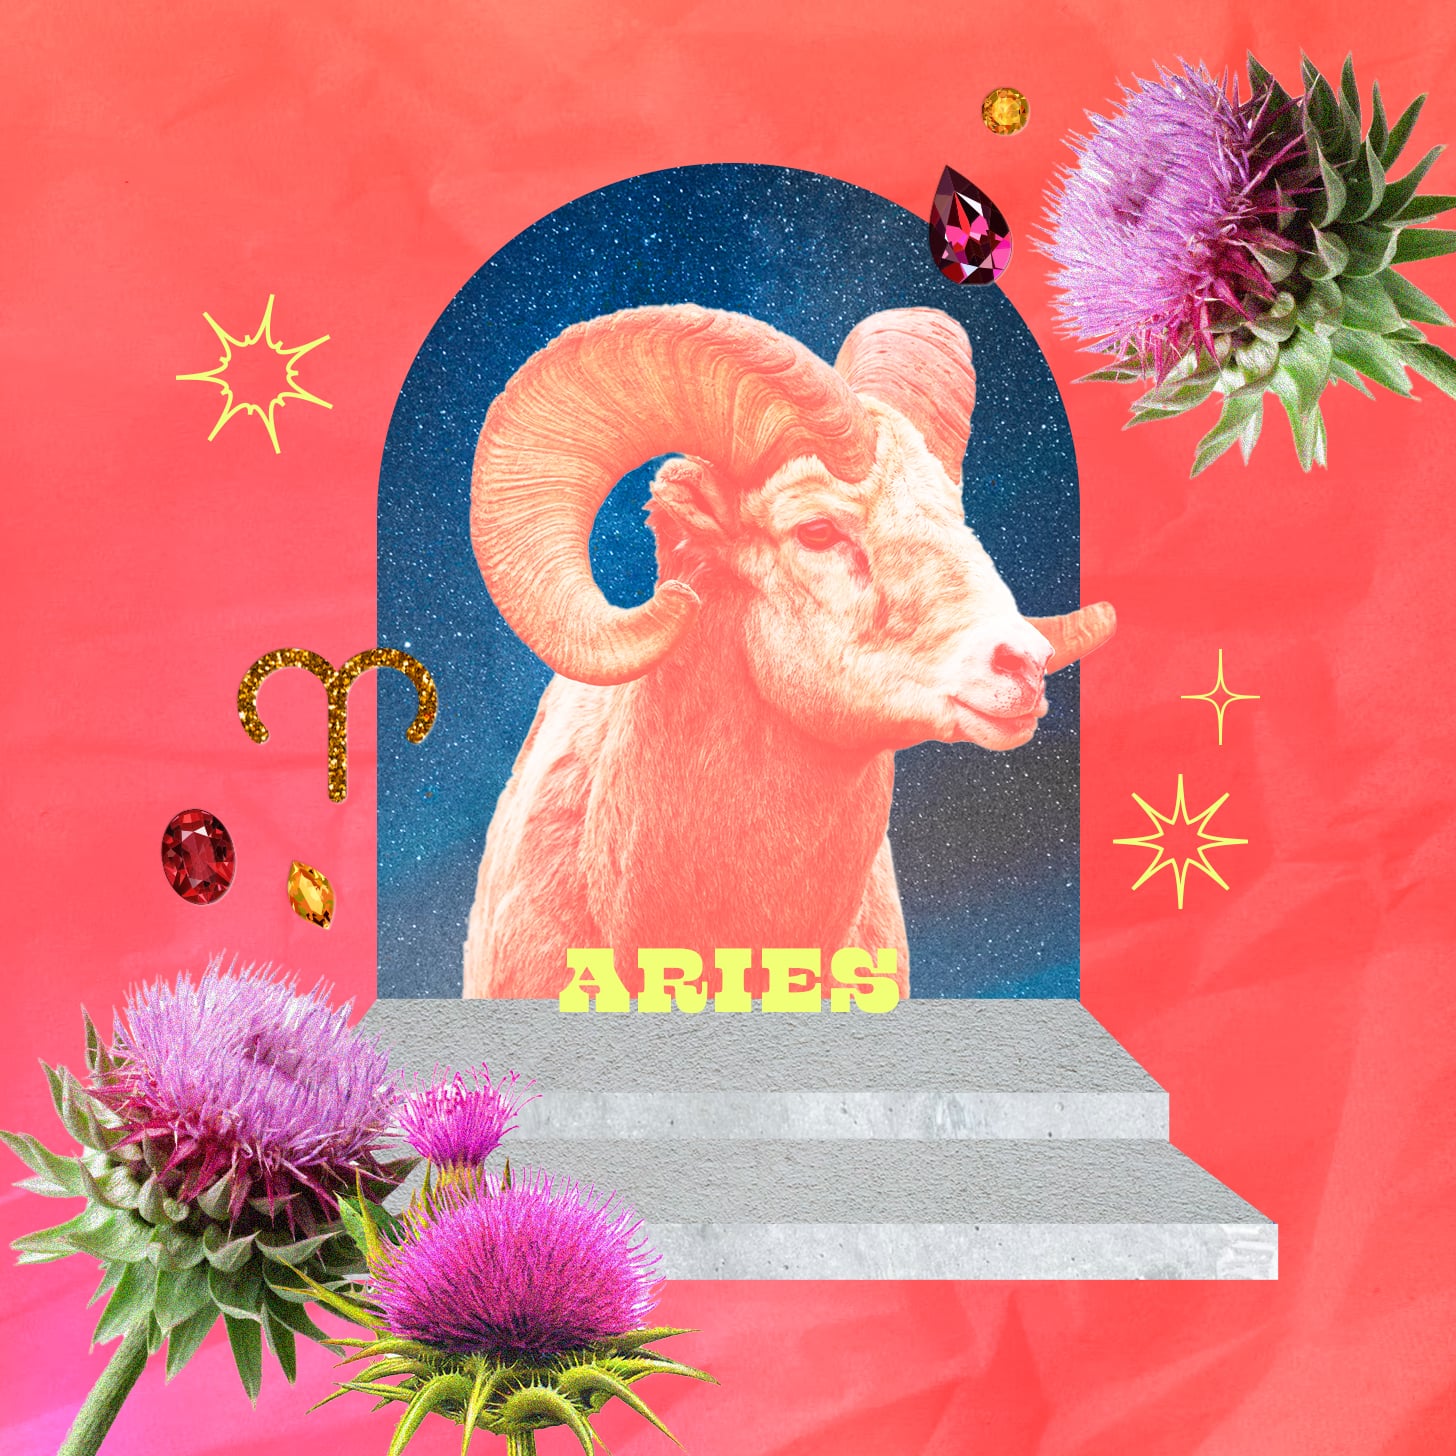 Aries weekly horoscope for October 9, 2022